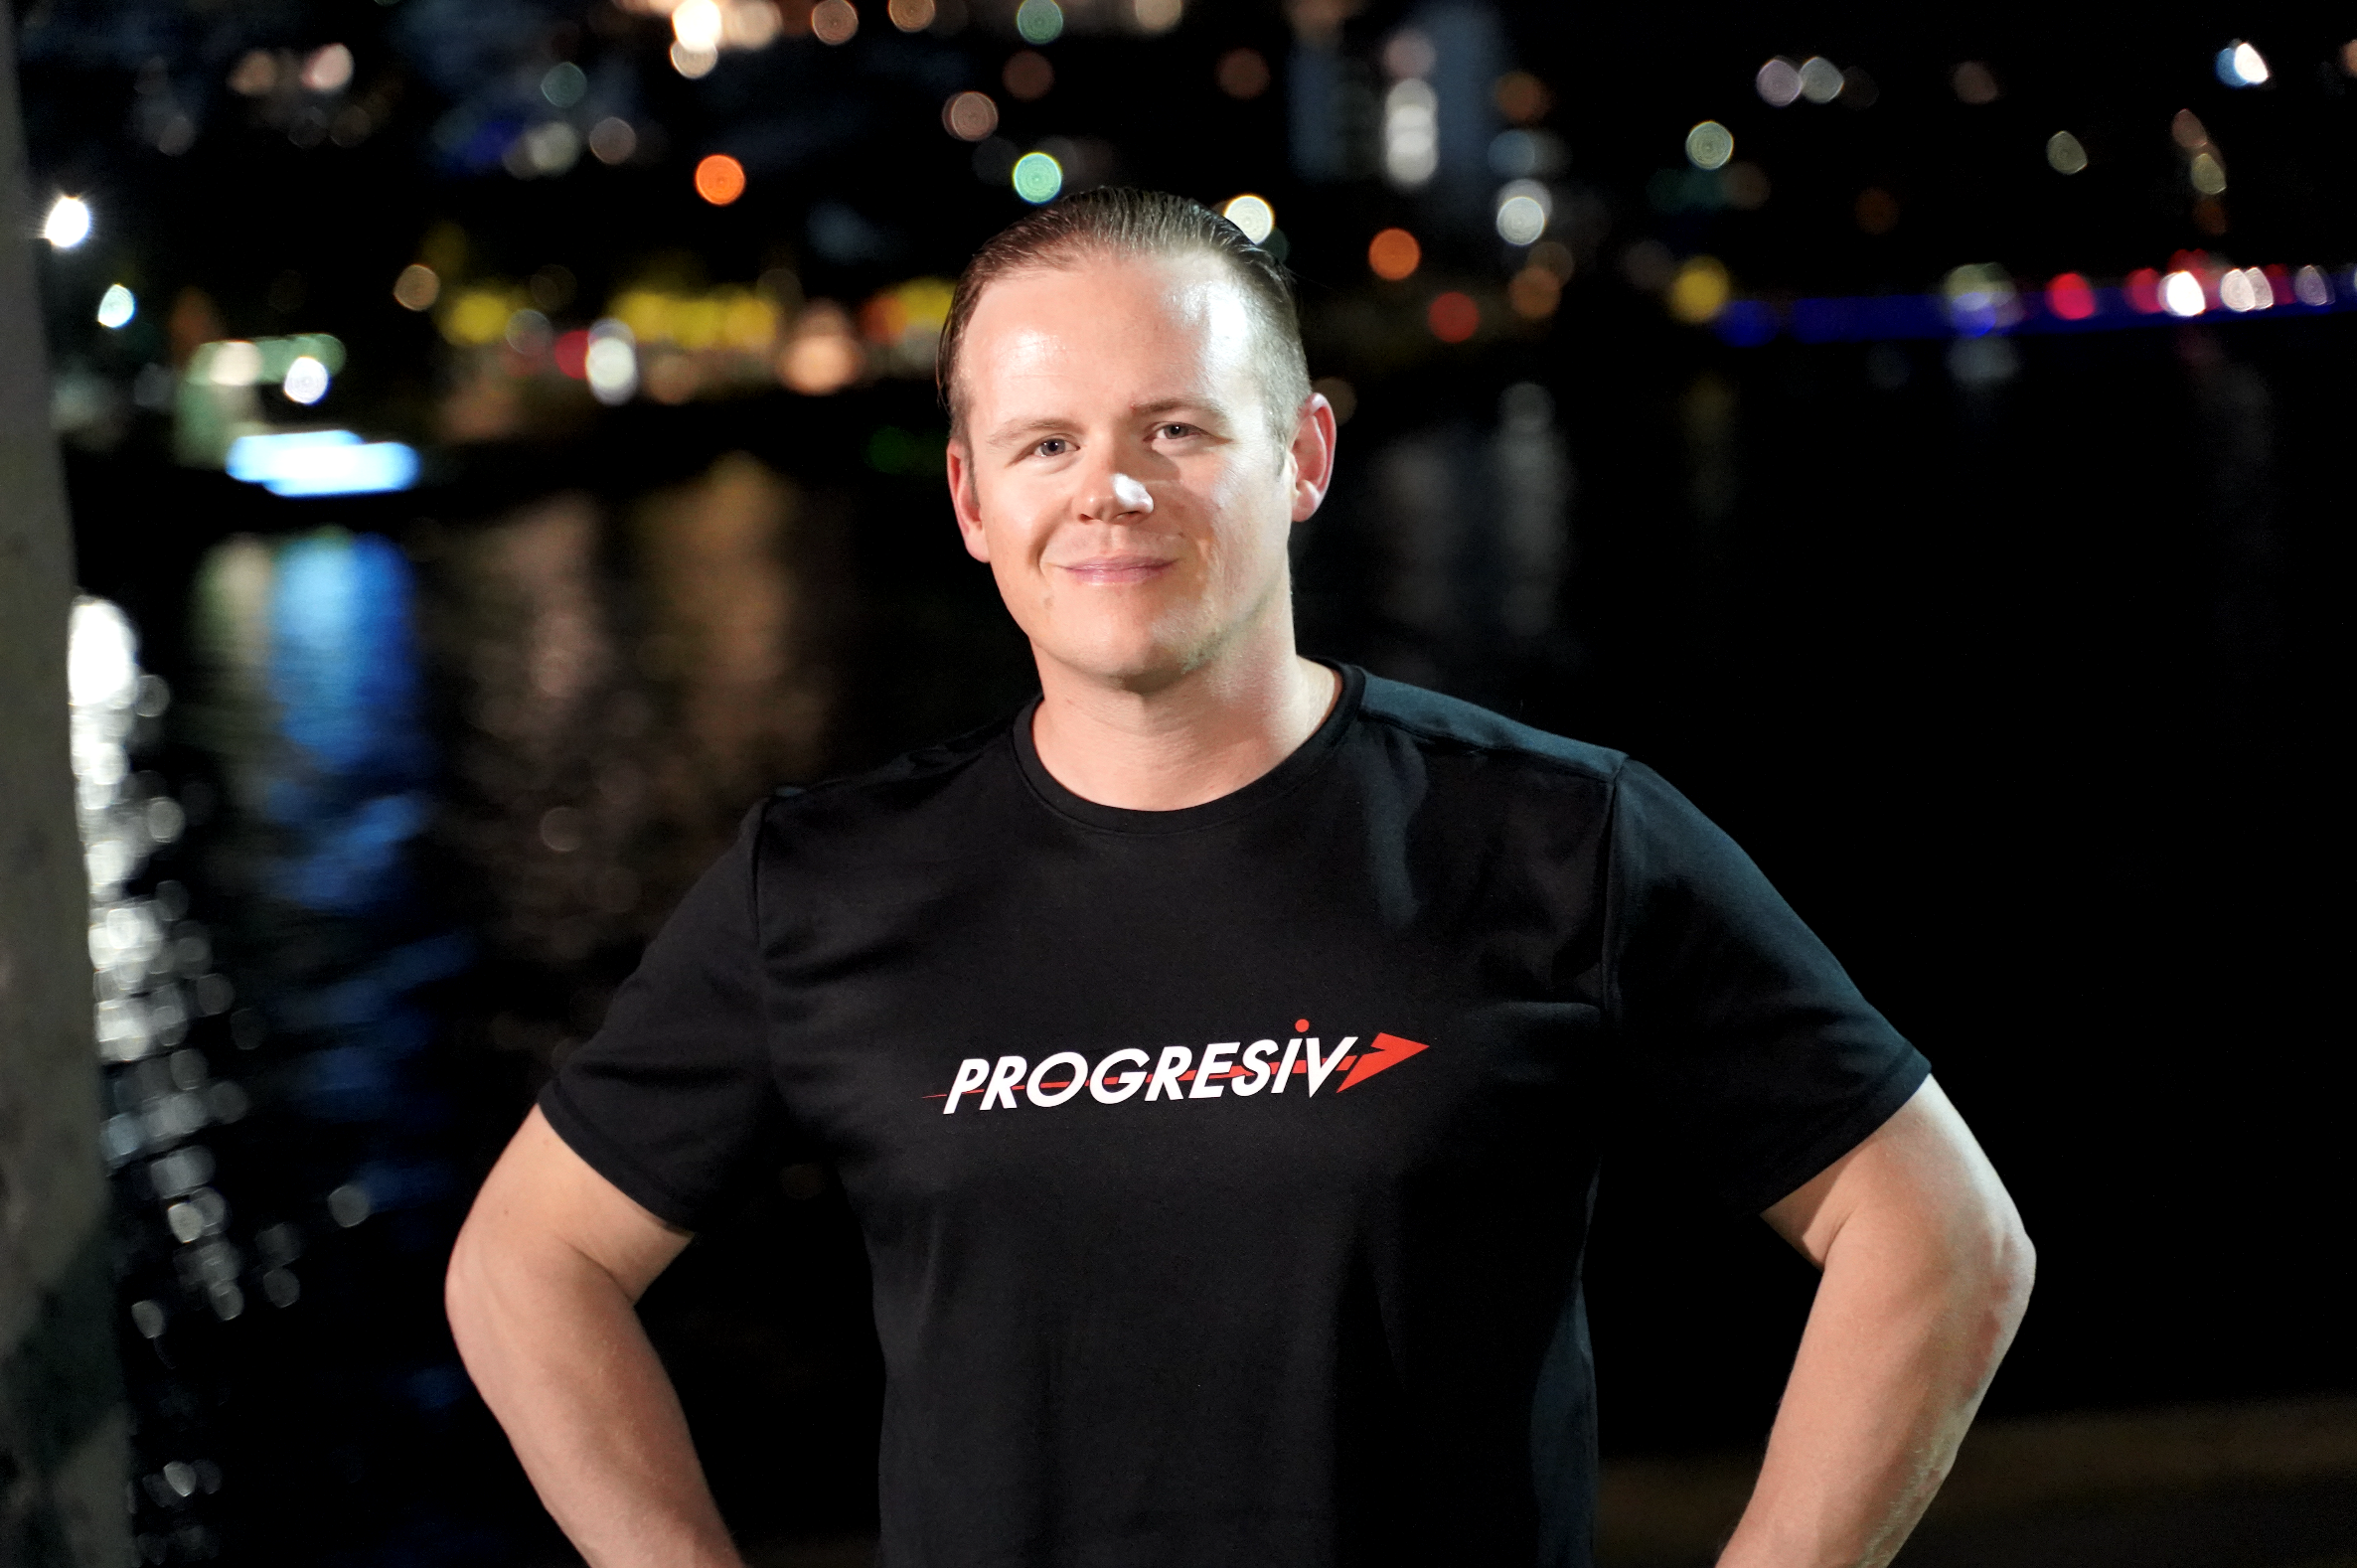 "Profile picture of Ben in a "Progresiv" branded shirt"